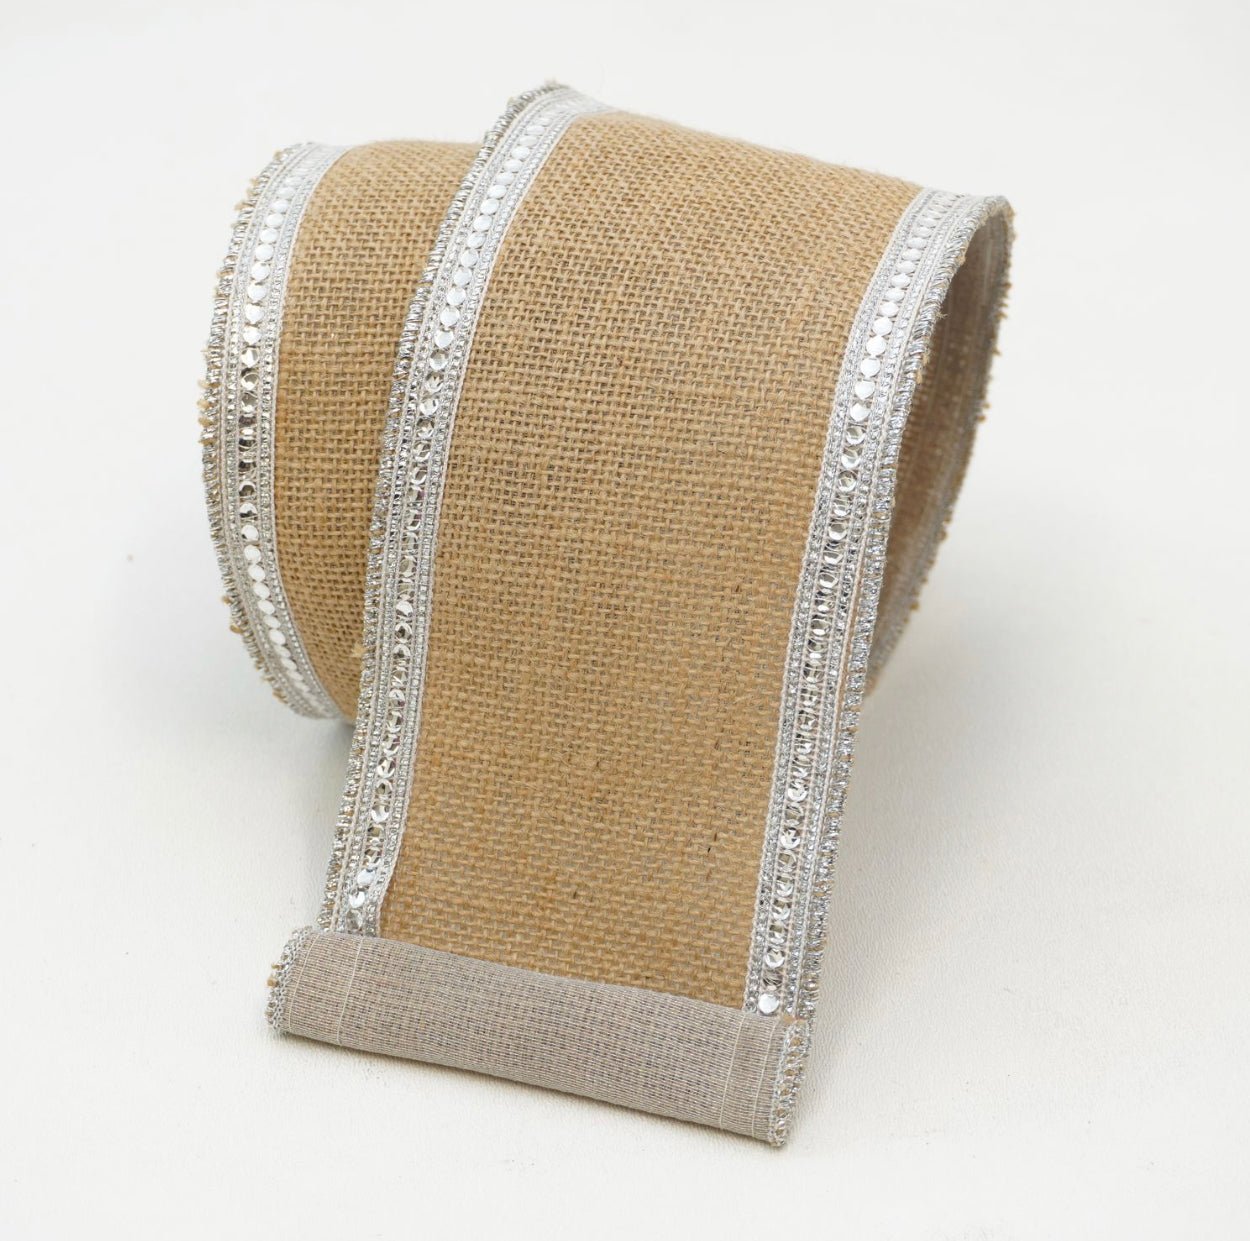 Farrisilk burlap with silver sequin edge 4” wired ribbon - Greenery Market